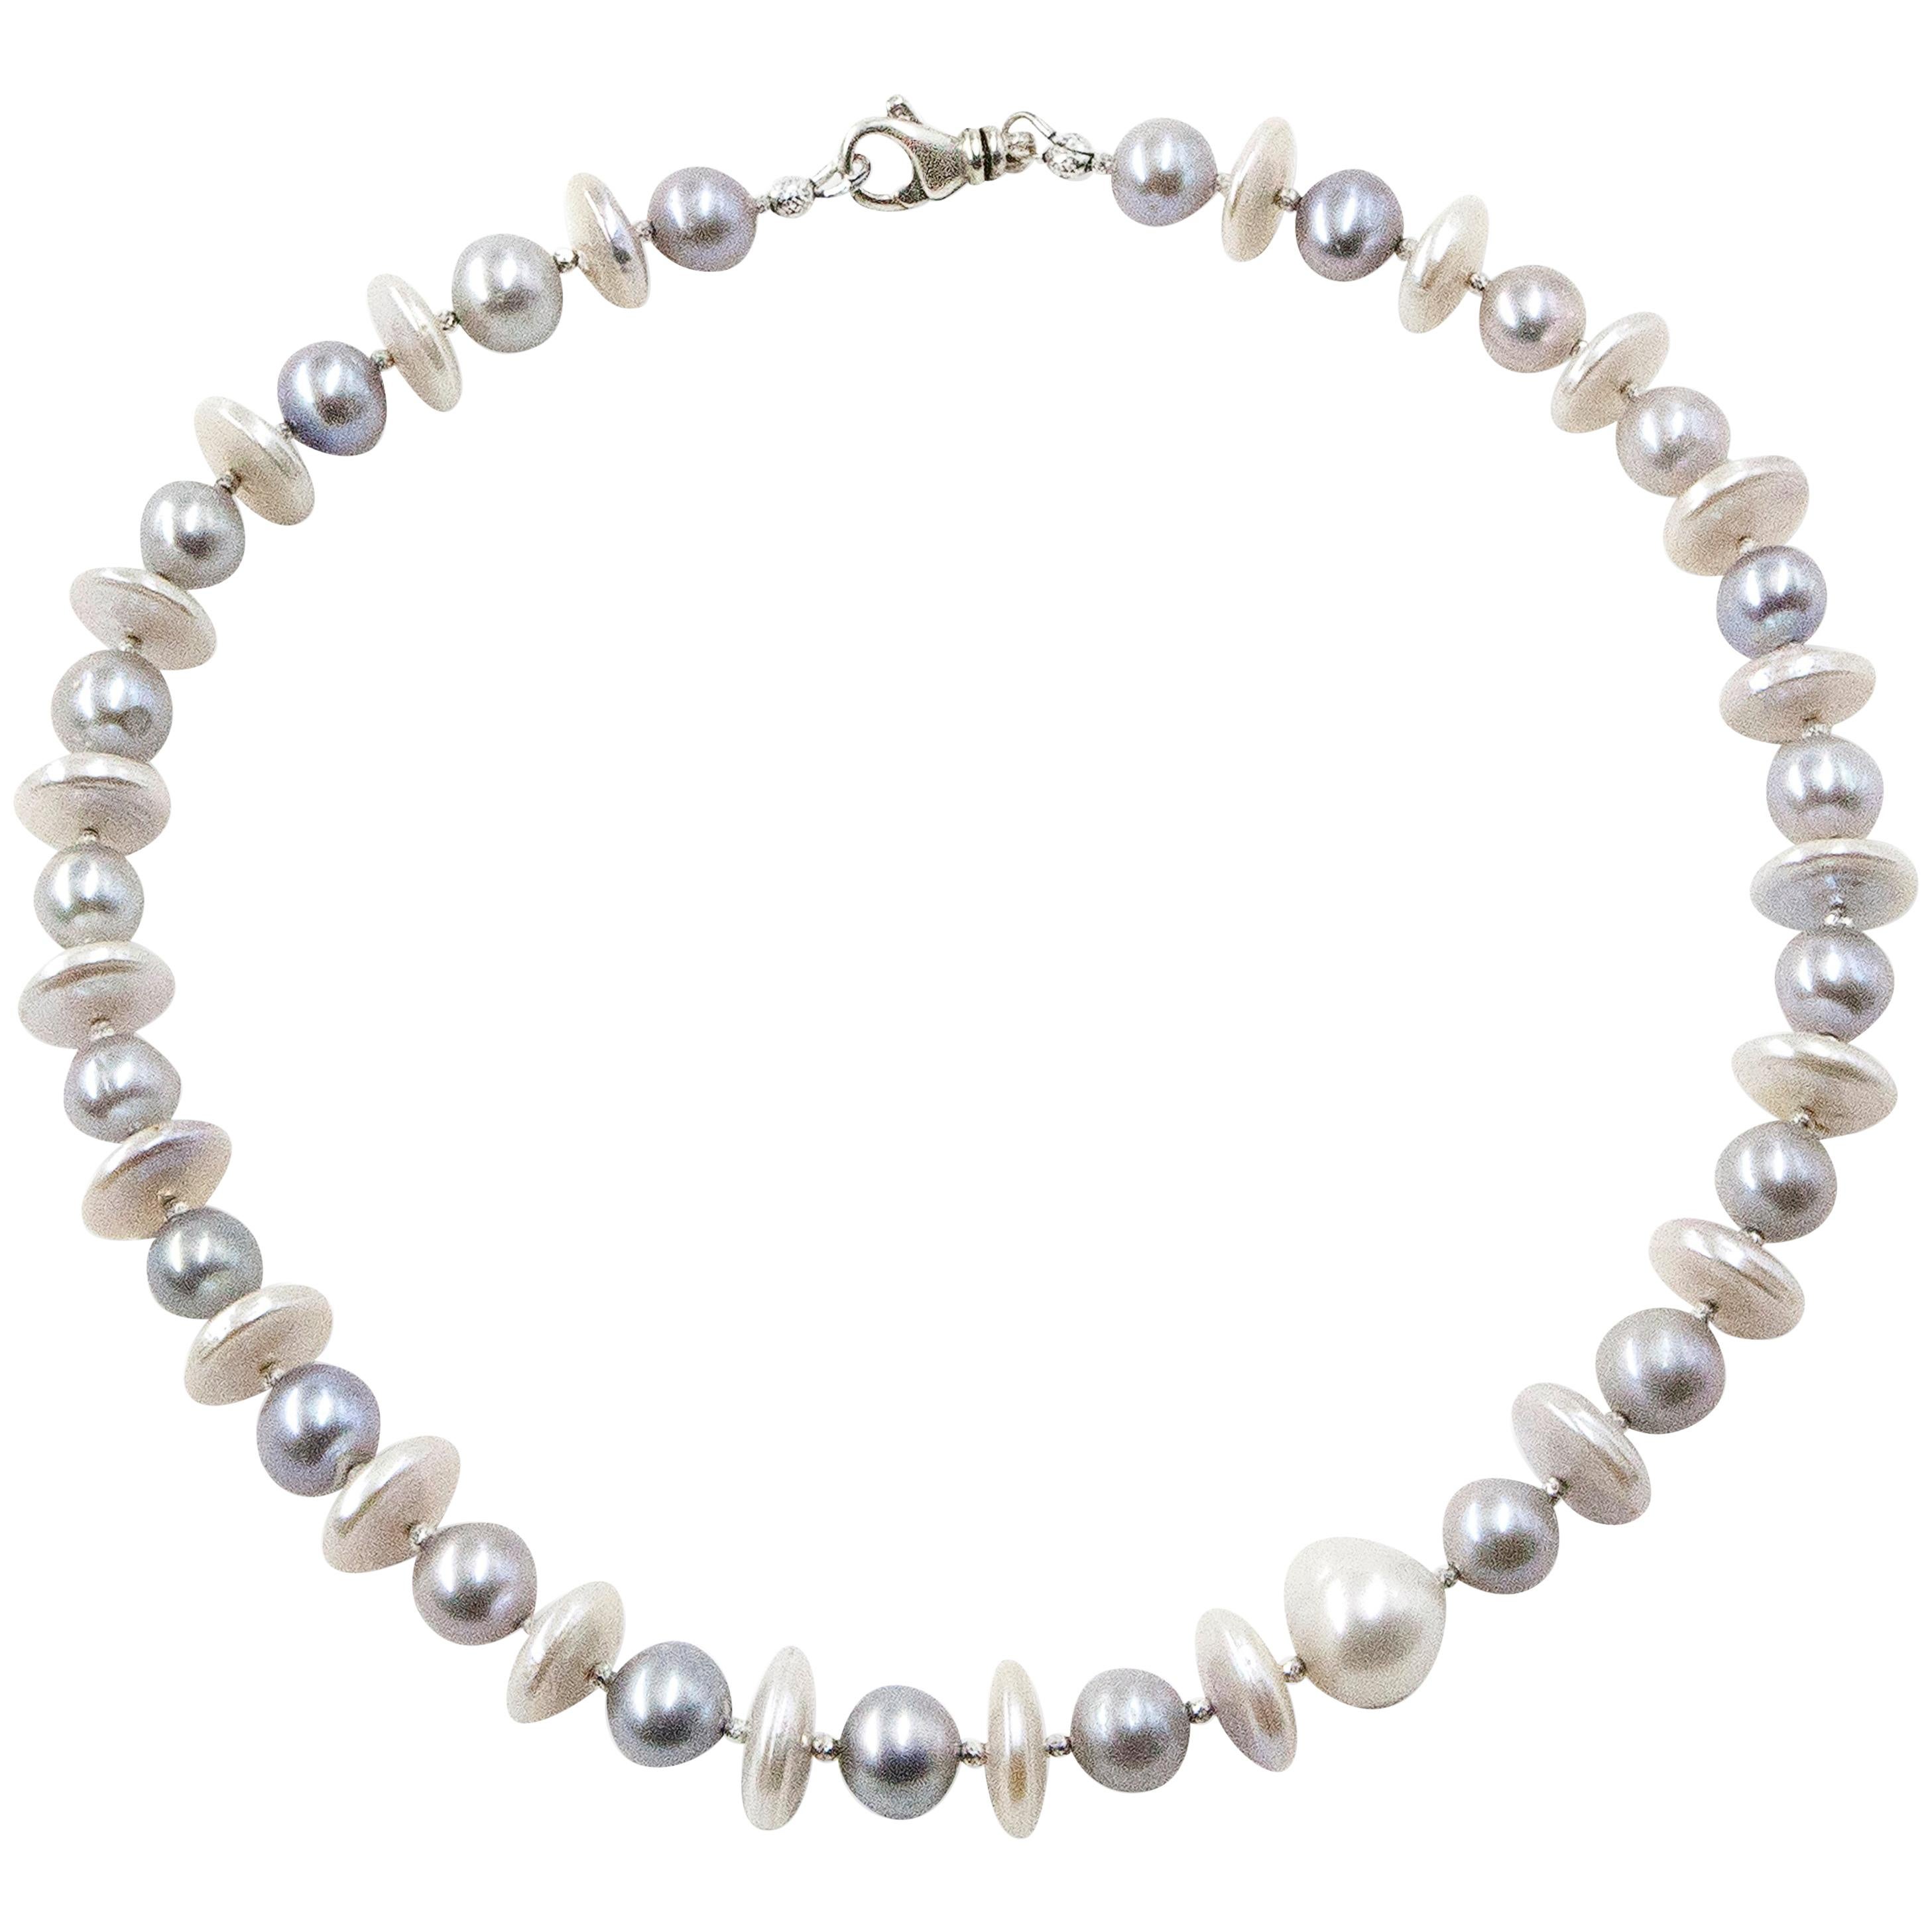 White Coin Pearl and Grey Pearl Necklace with Silver Diamond Cut Beads For Sale